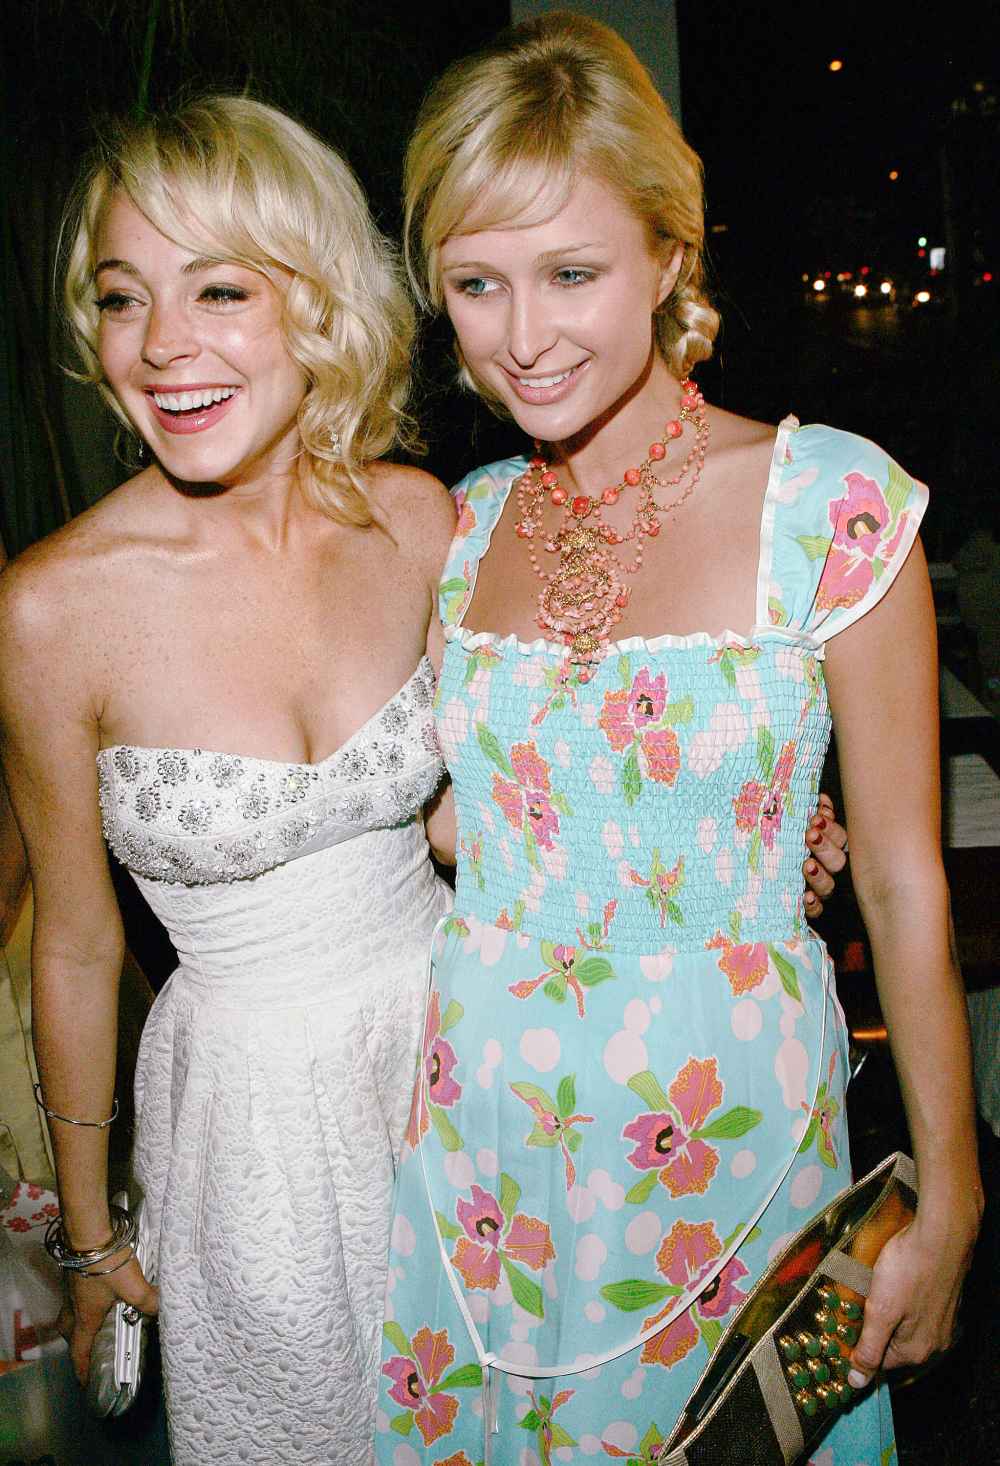 Lindsay Lohan Shares Throwback Photo With 'Love' Paris Hilton Amid Feud 'Friends Are True'